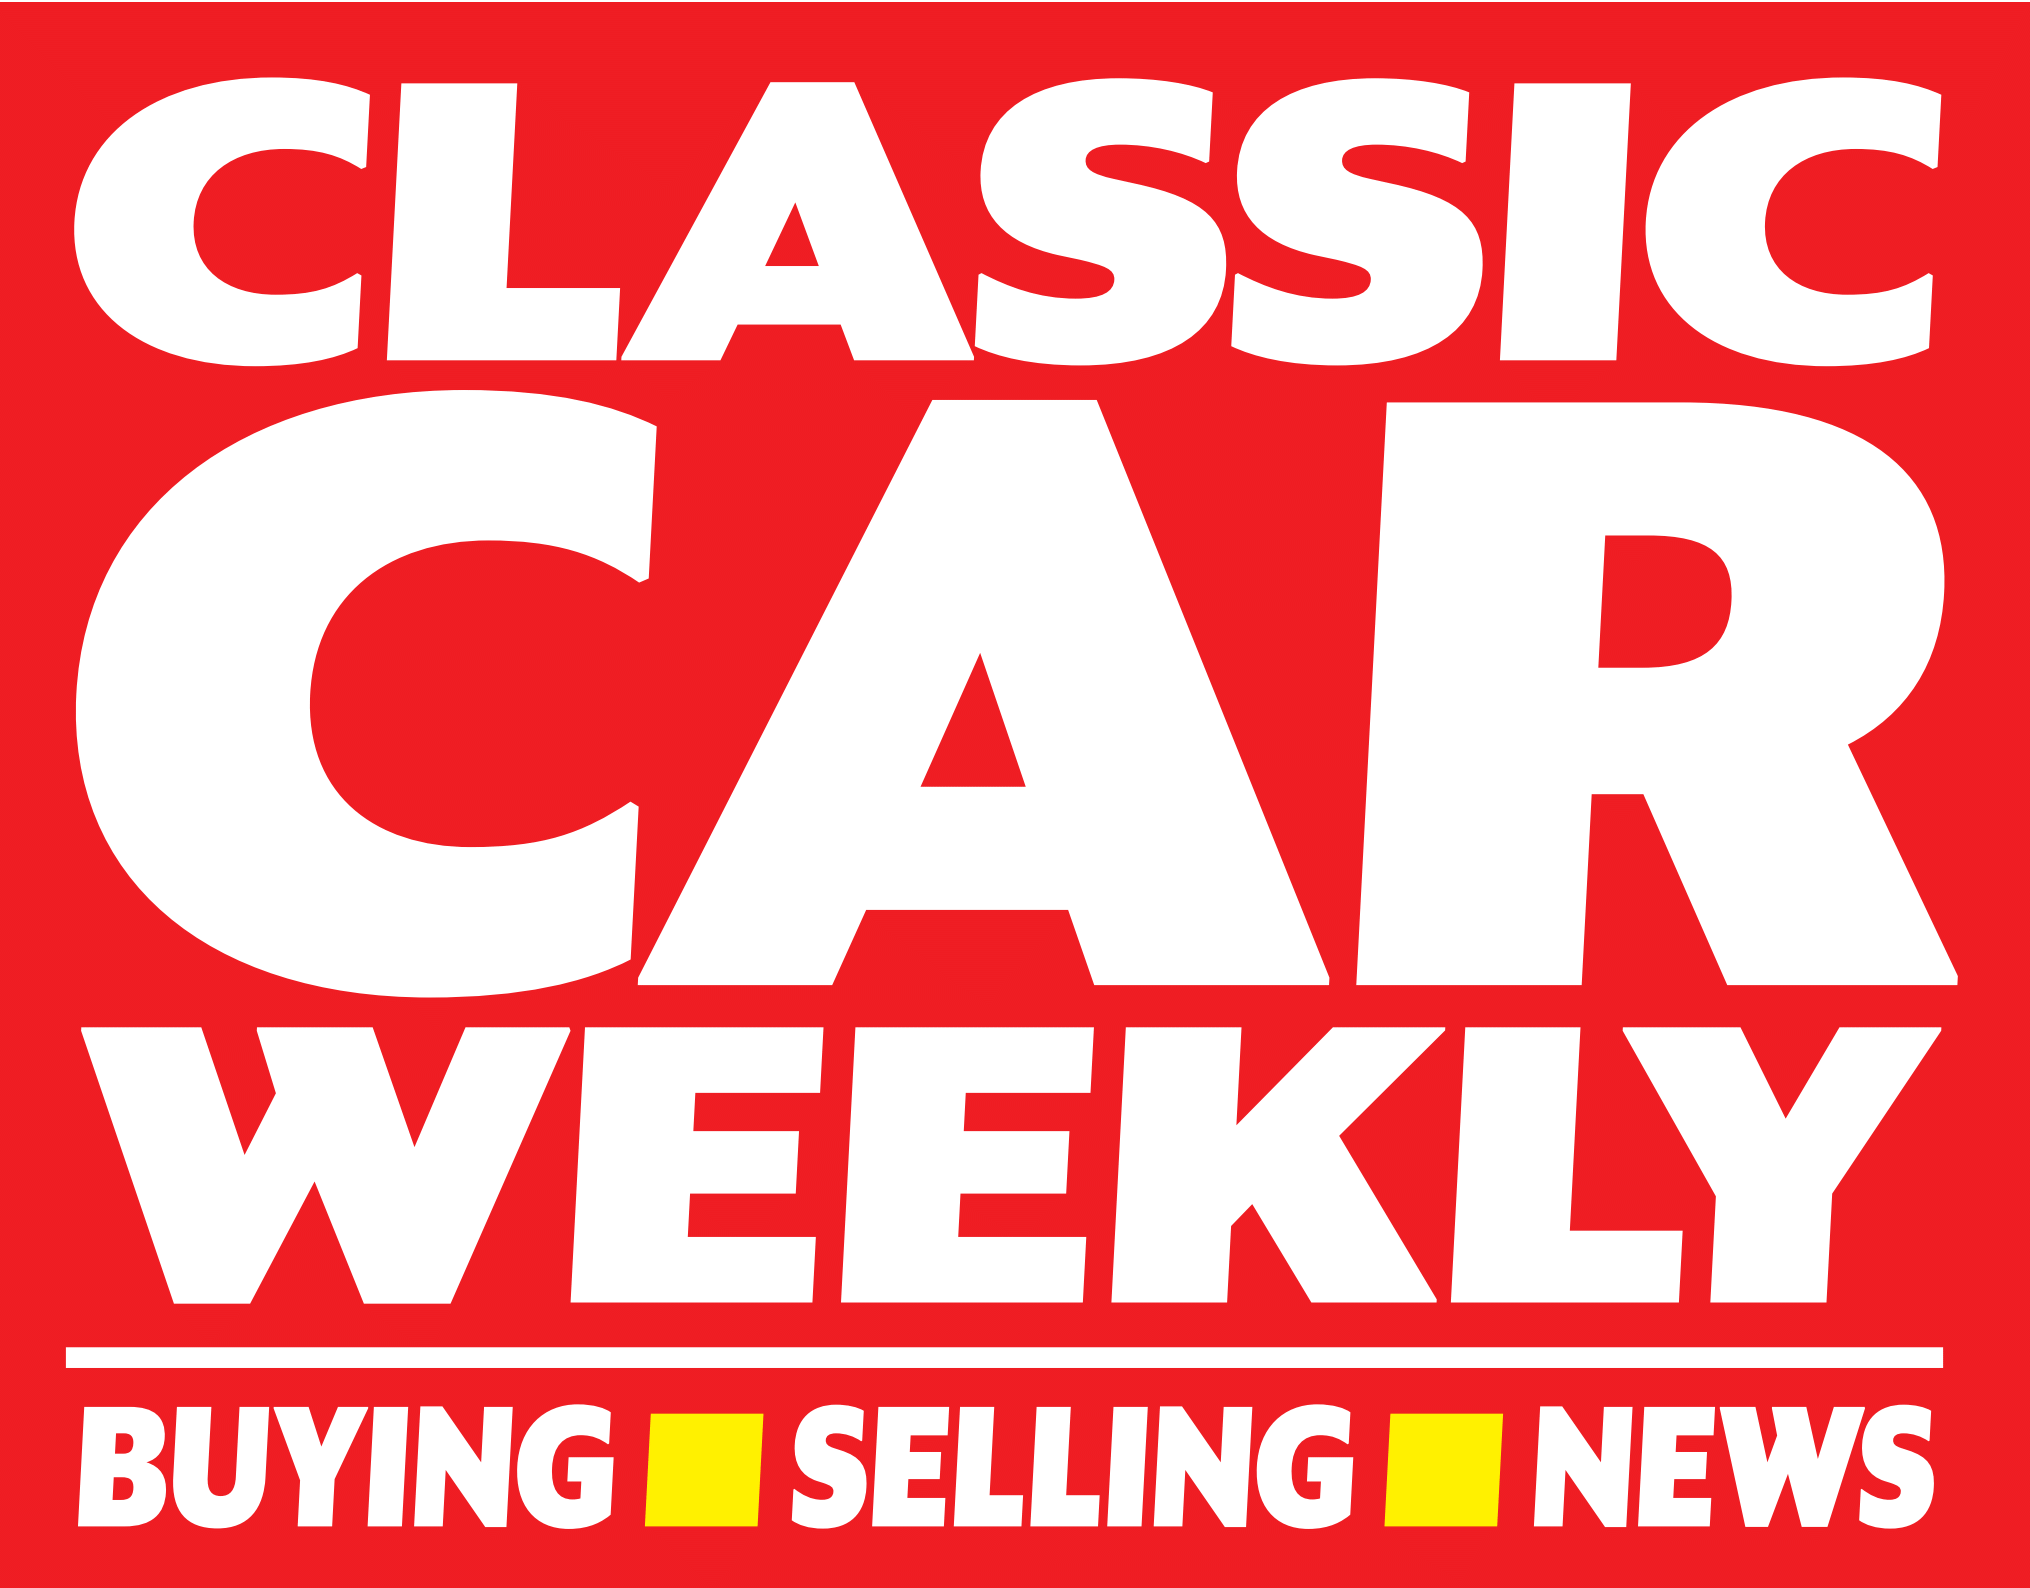 Classic Car Weekly - The Future of Classics